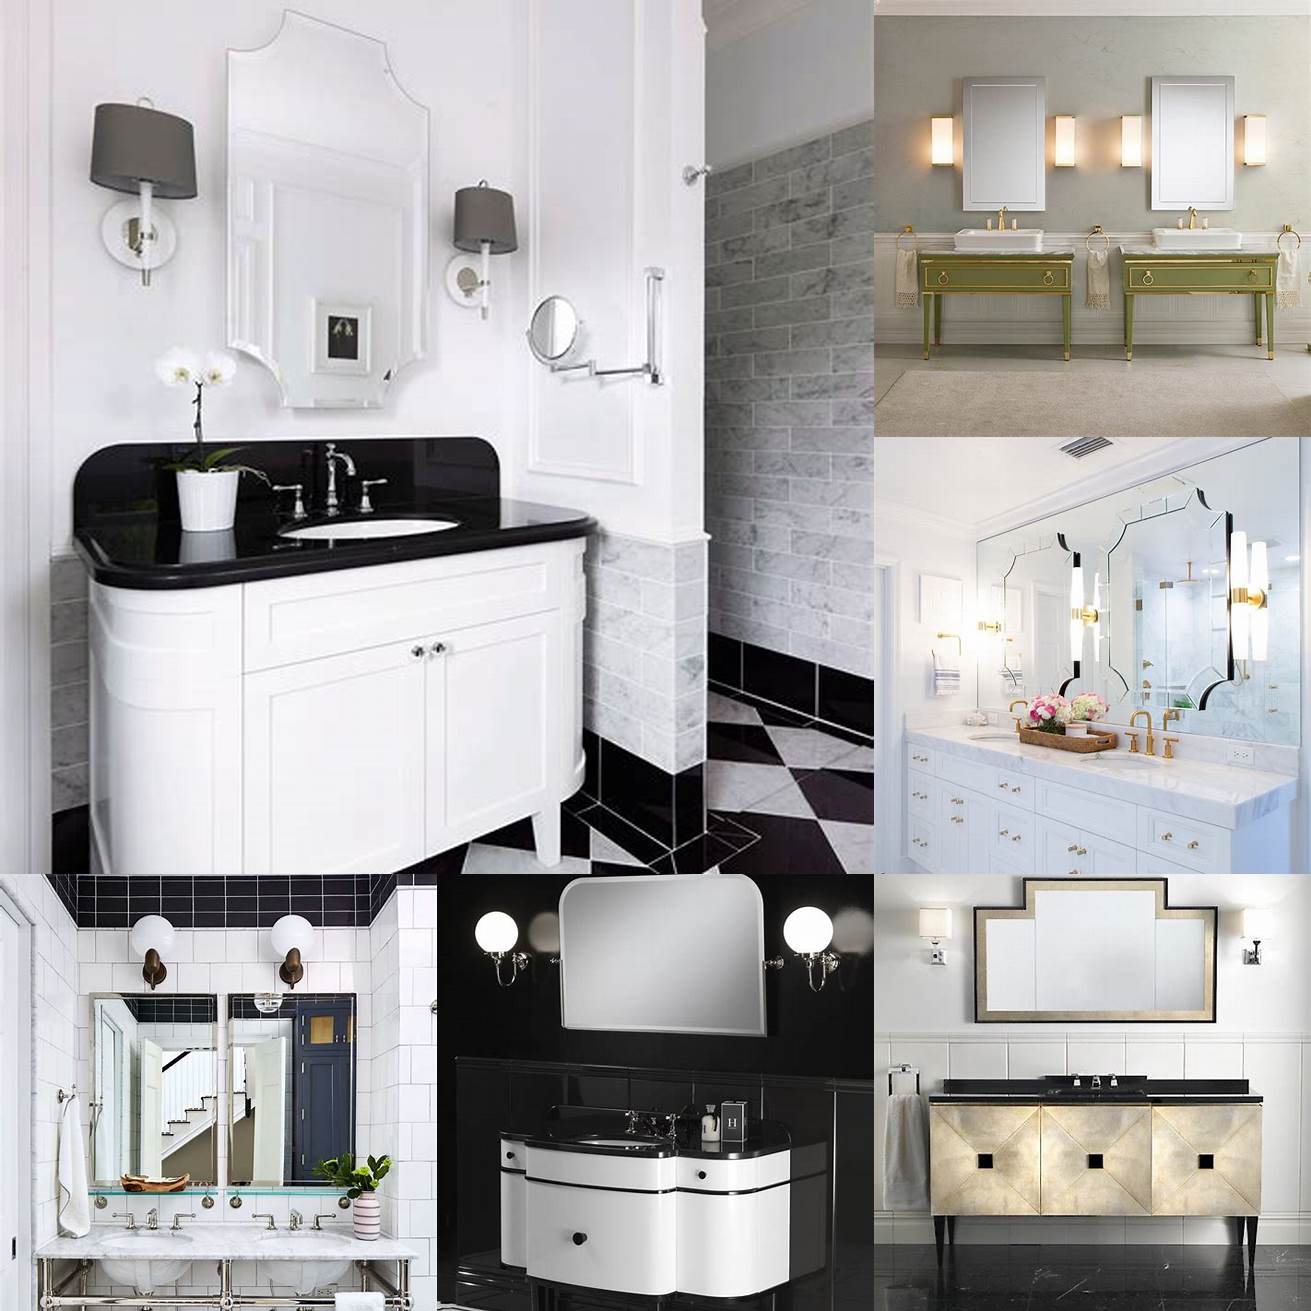 This Art Deco Bathroom Vanity incorporates both metallic accents and ornate detailing